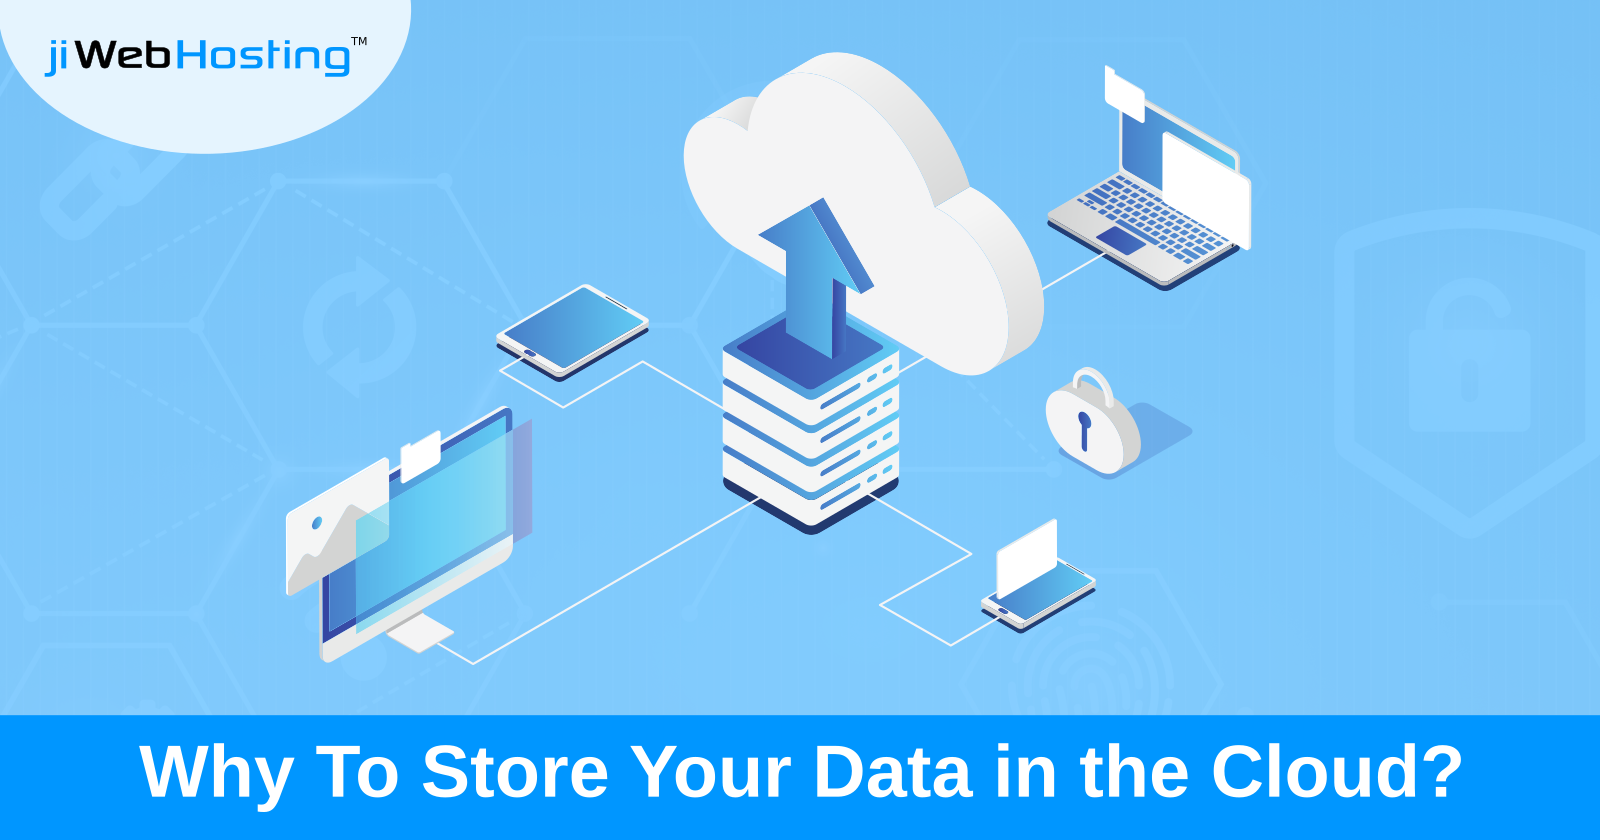 Why To Store Your Data in the Cloud?